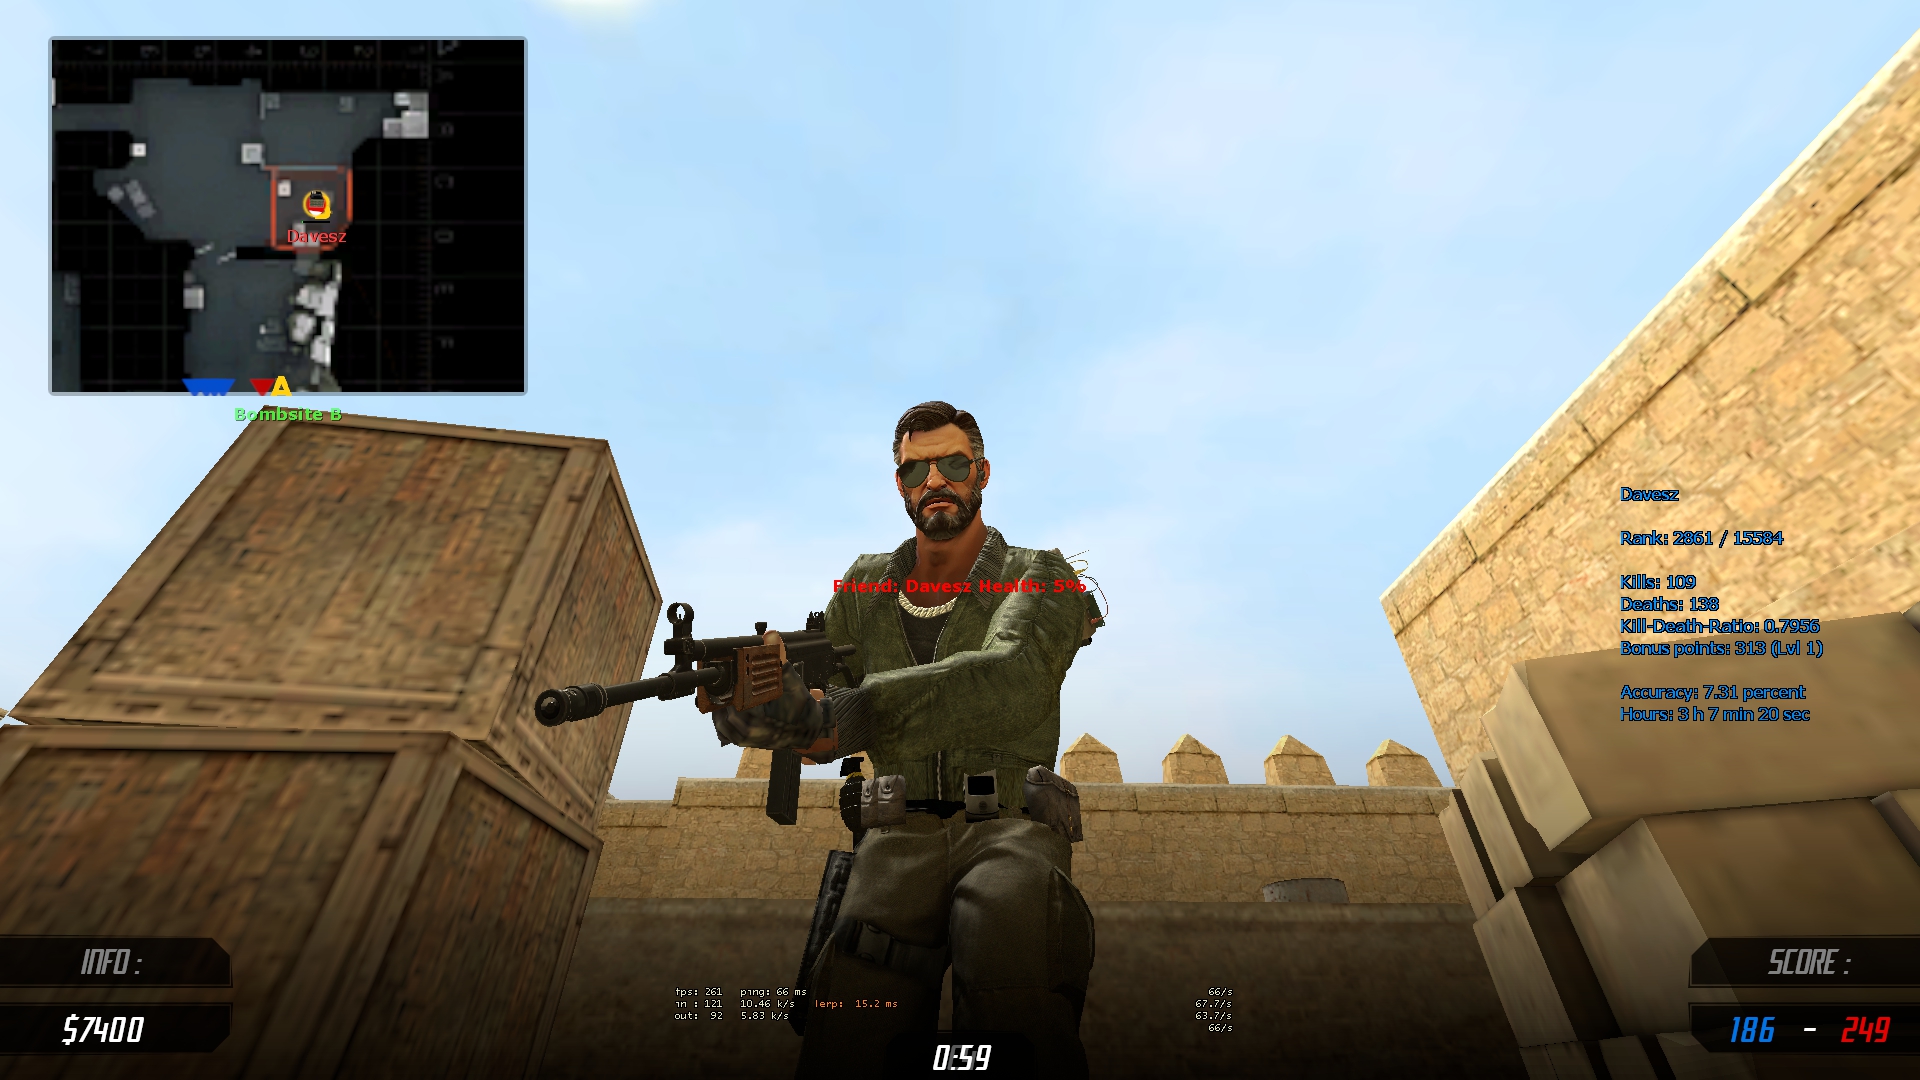 Image 6 - Counter-Strike: Source Offensive mod for Counter-Strike: Source -  Mod DB